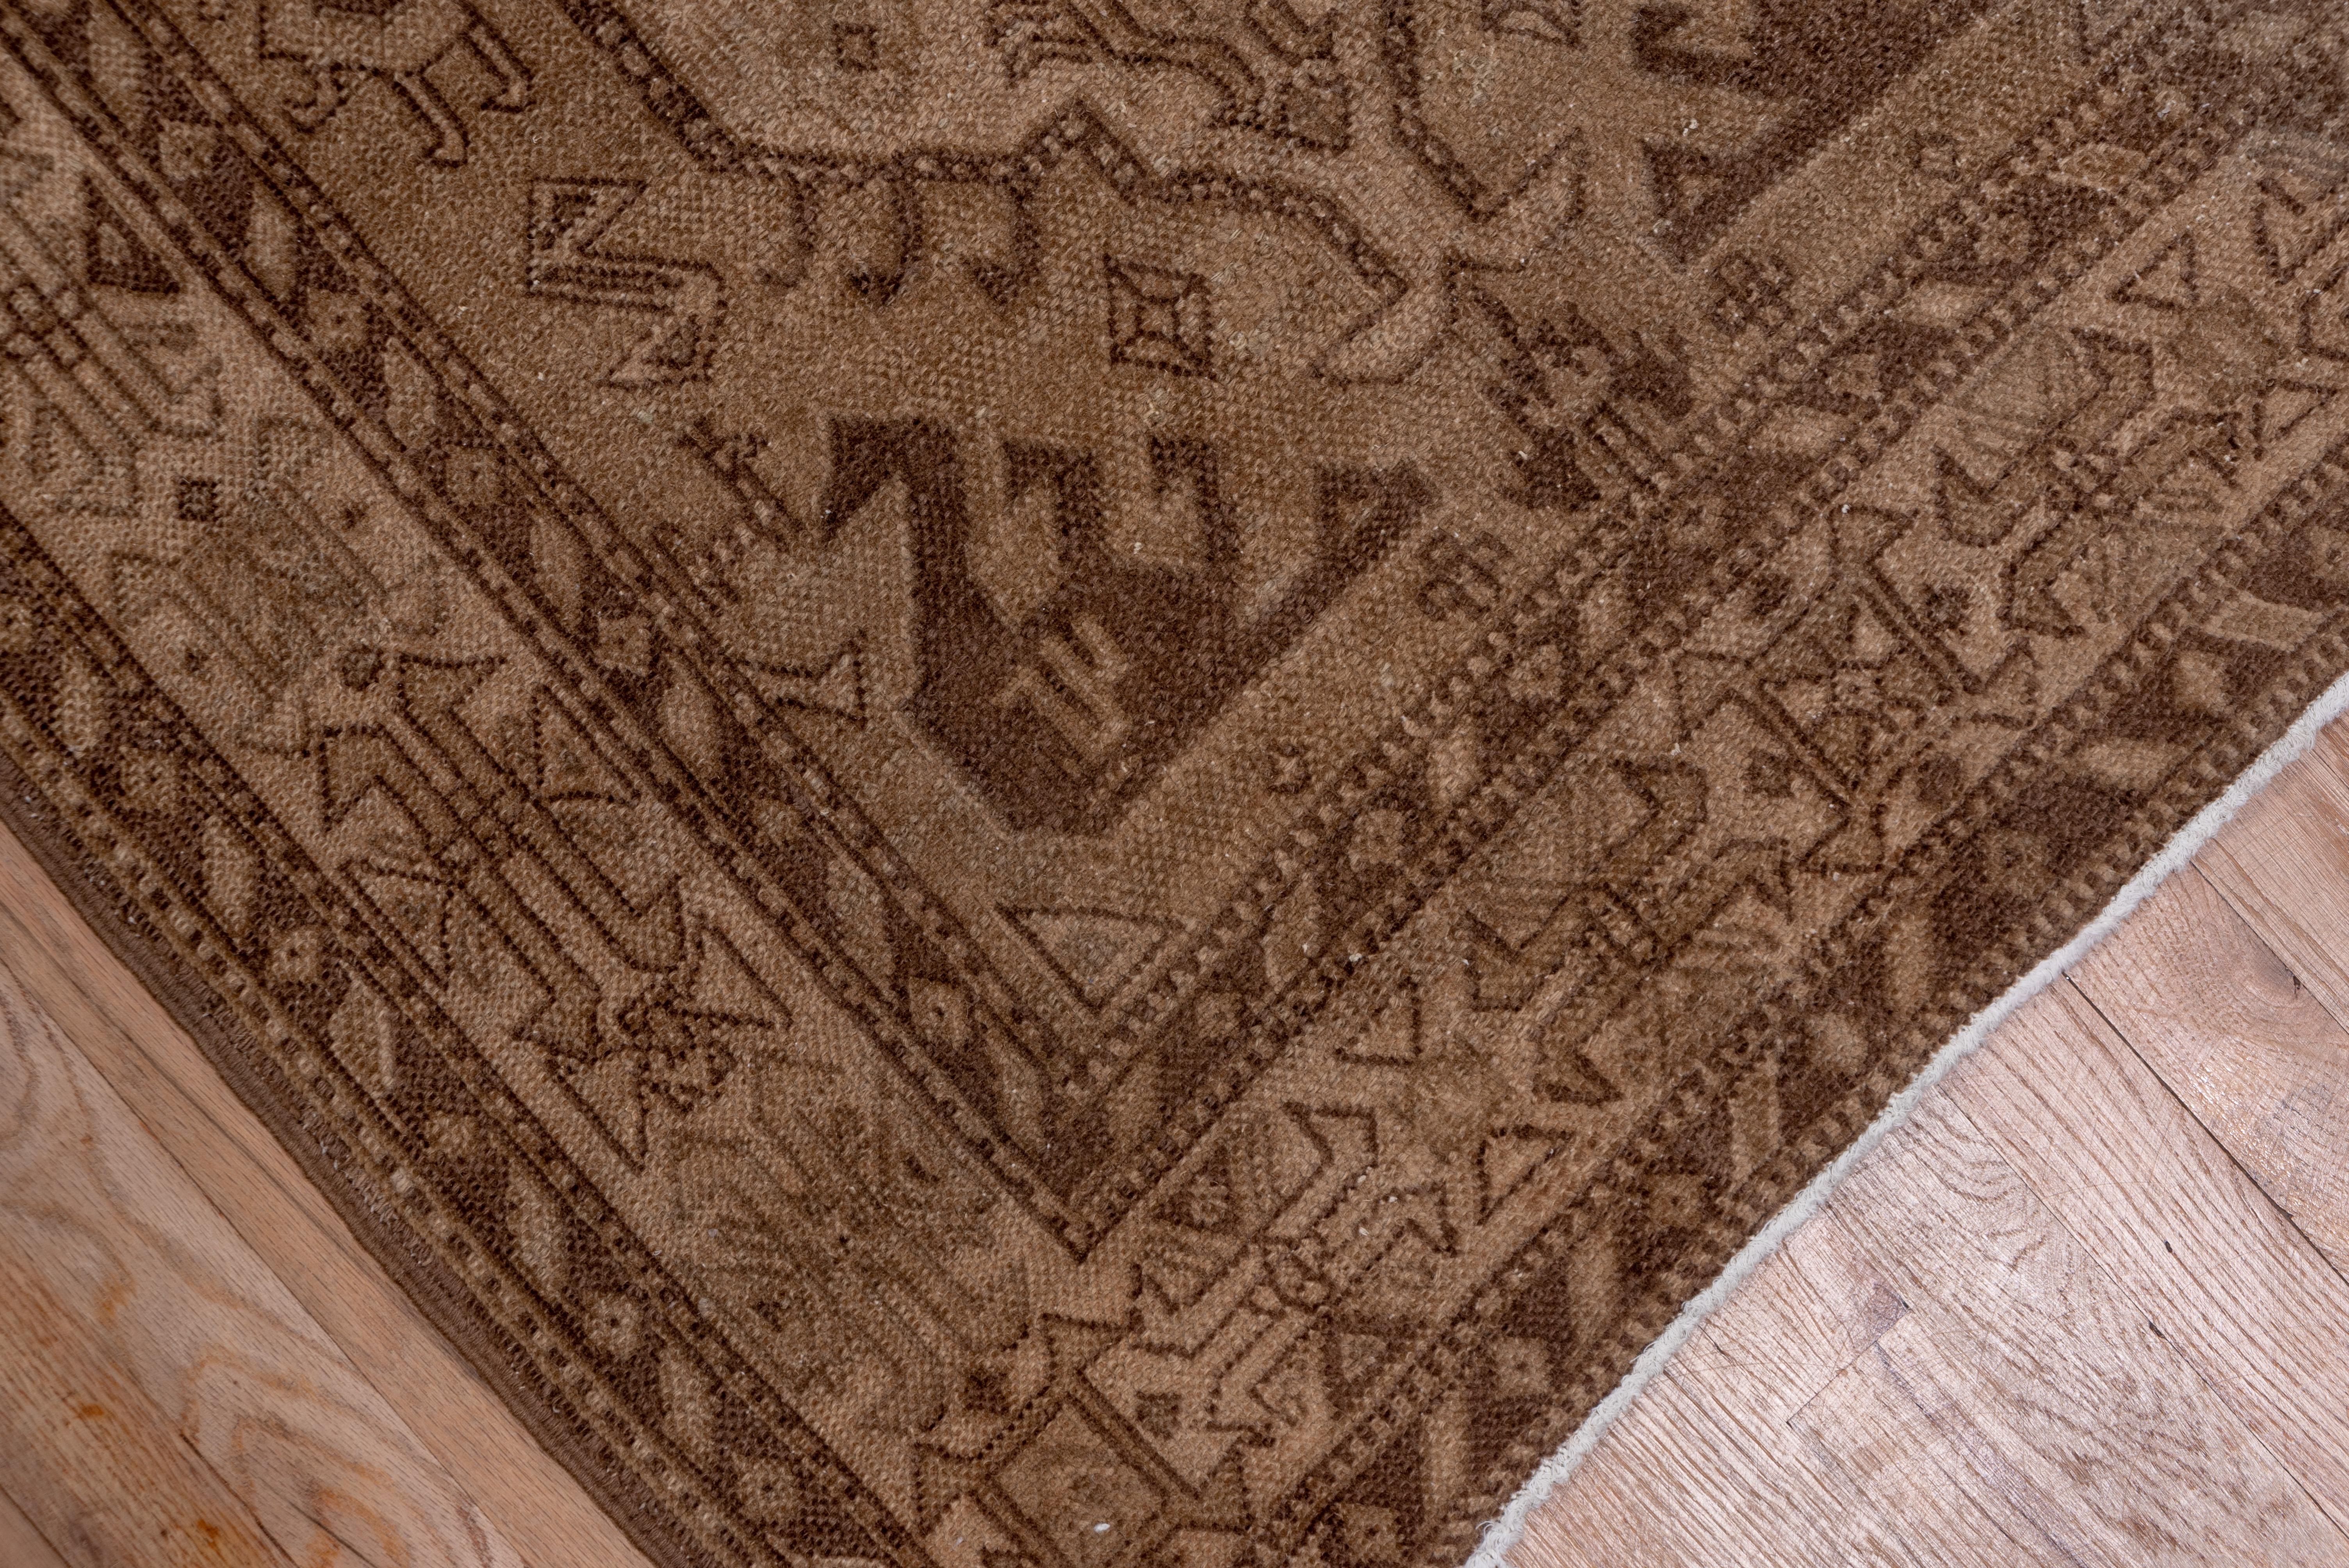 This runner has a light brown field displaying five sparsely hooked cartouches in beige and dark brown. Divided hooked triangle lateral fillers. Cream border with triangles, straight C shapes and squares. Quasi-Caucasian general geometric style. A